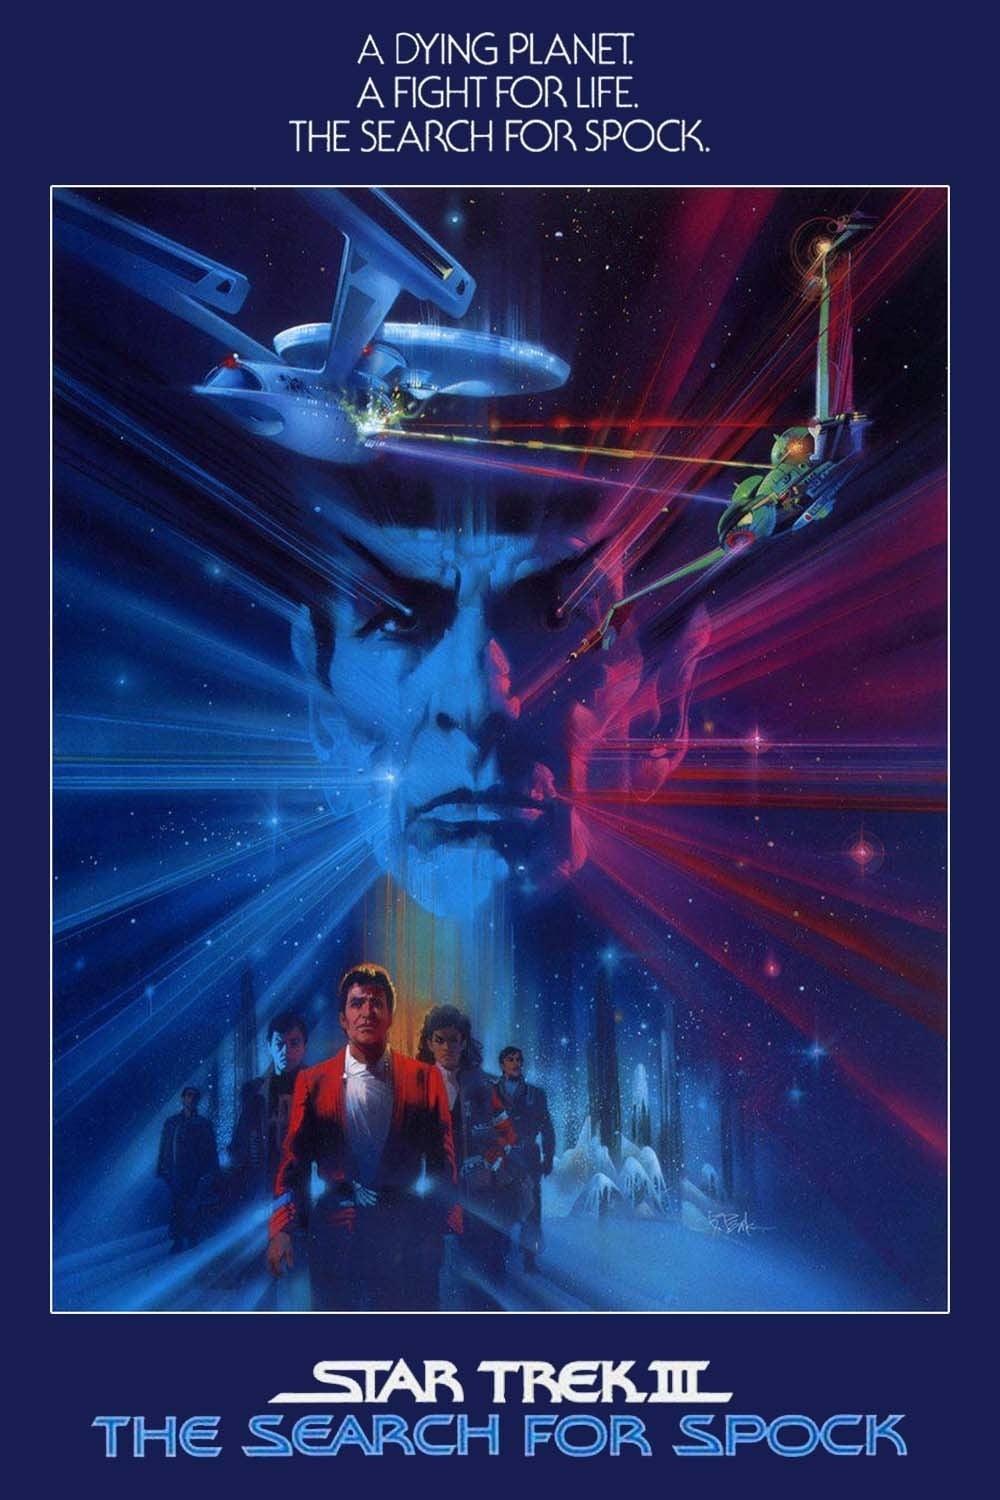 Star Trek III: The Search for Spock poster